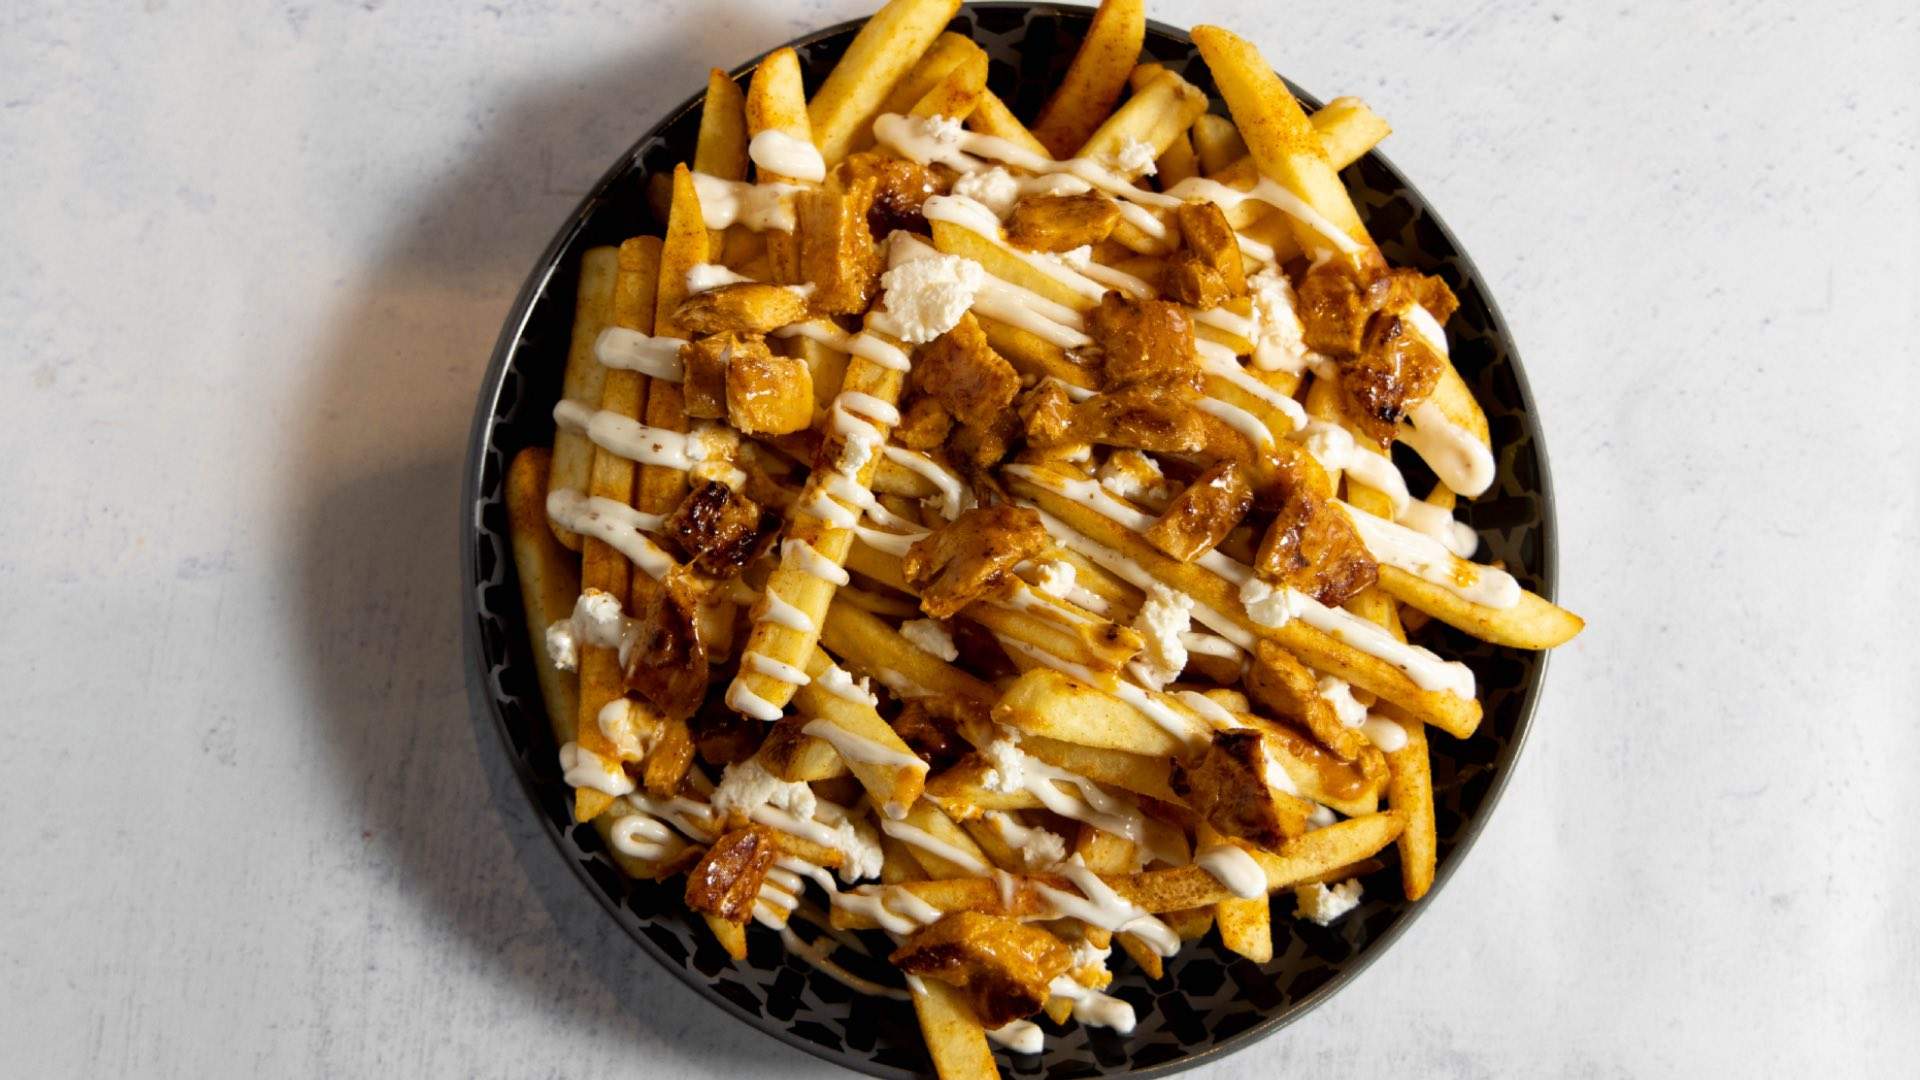 Nando's New Loaded Chips